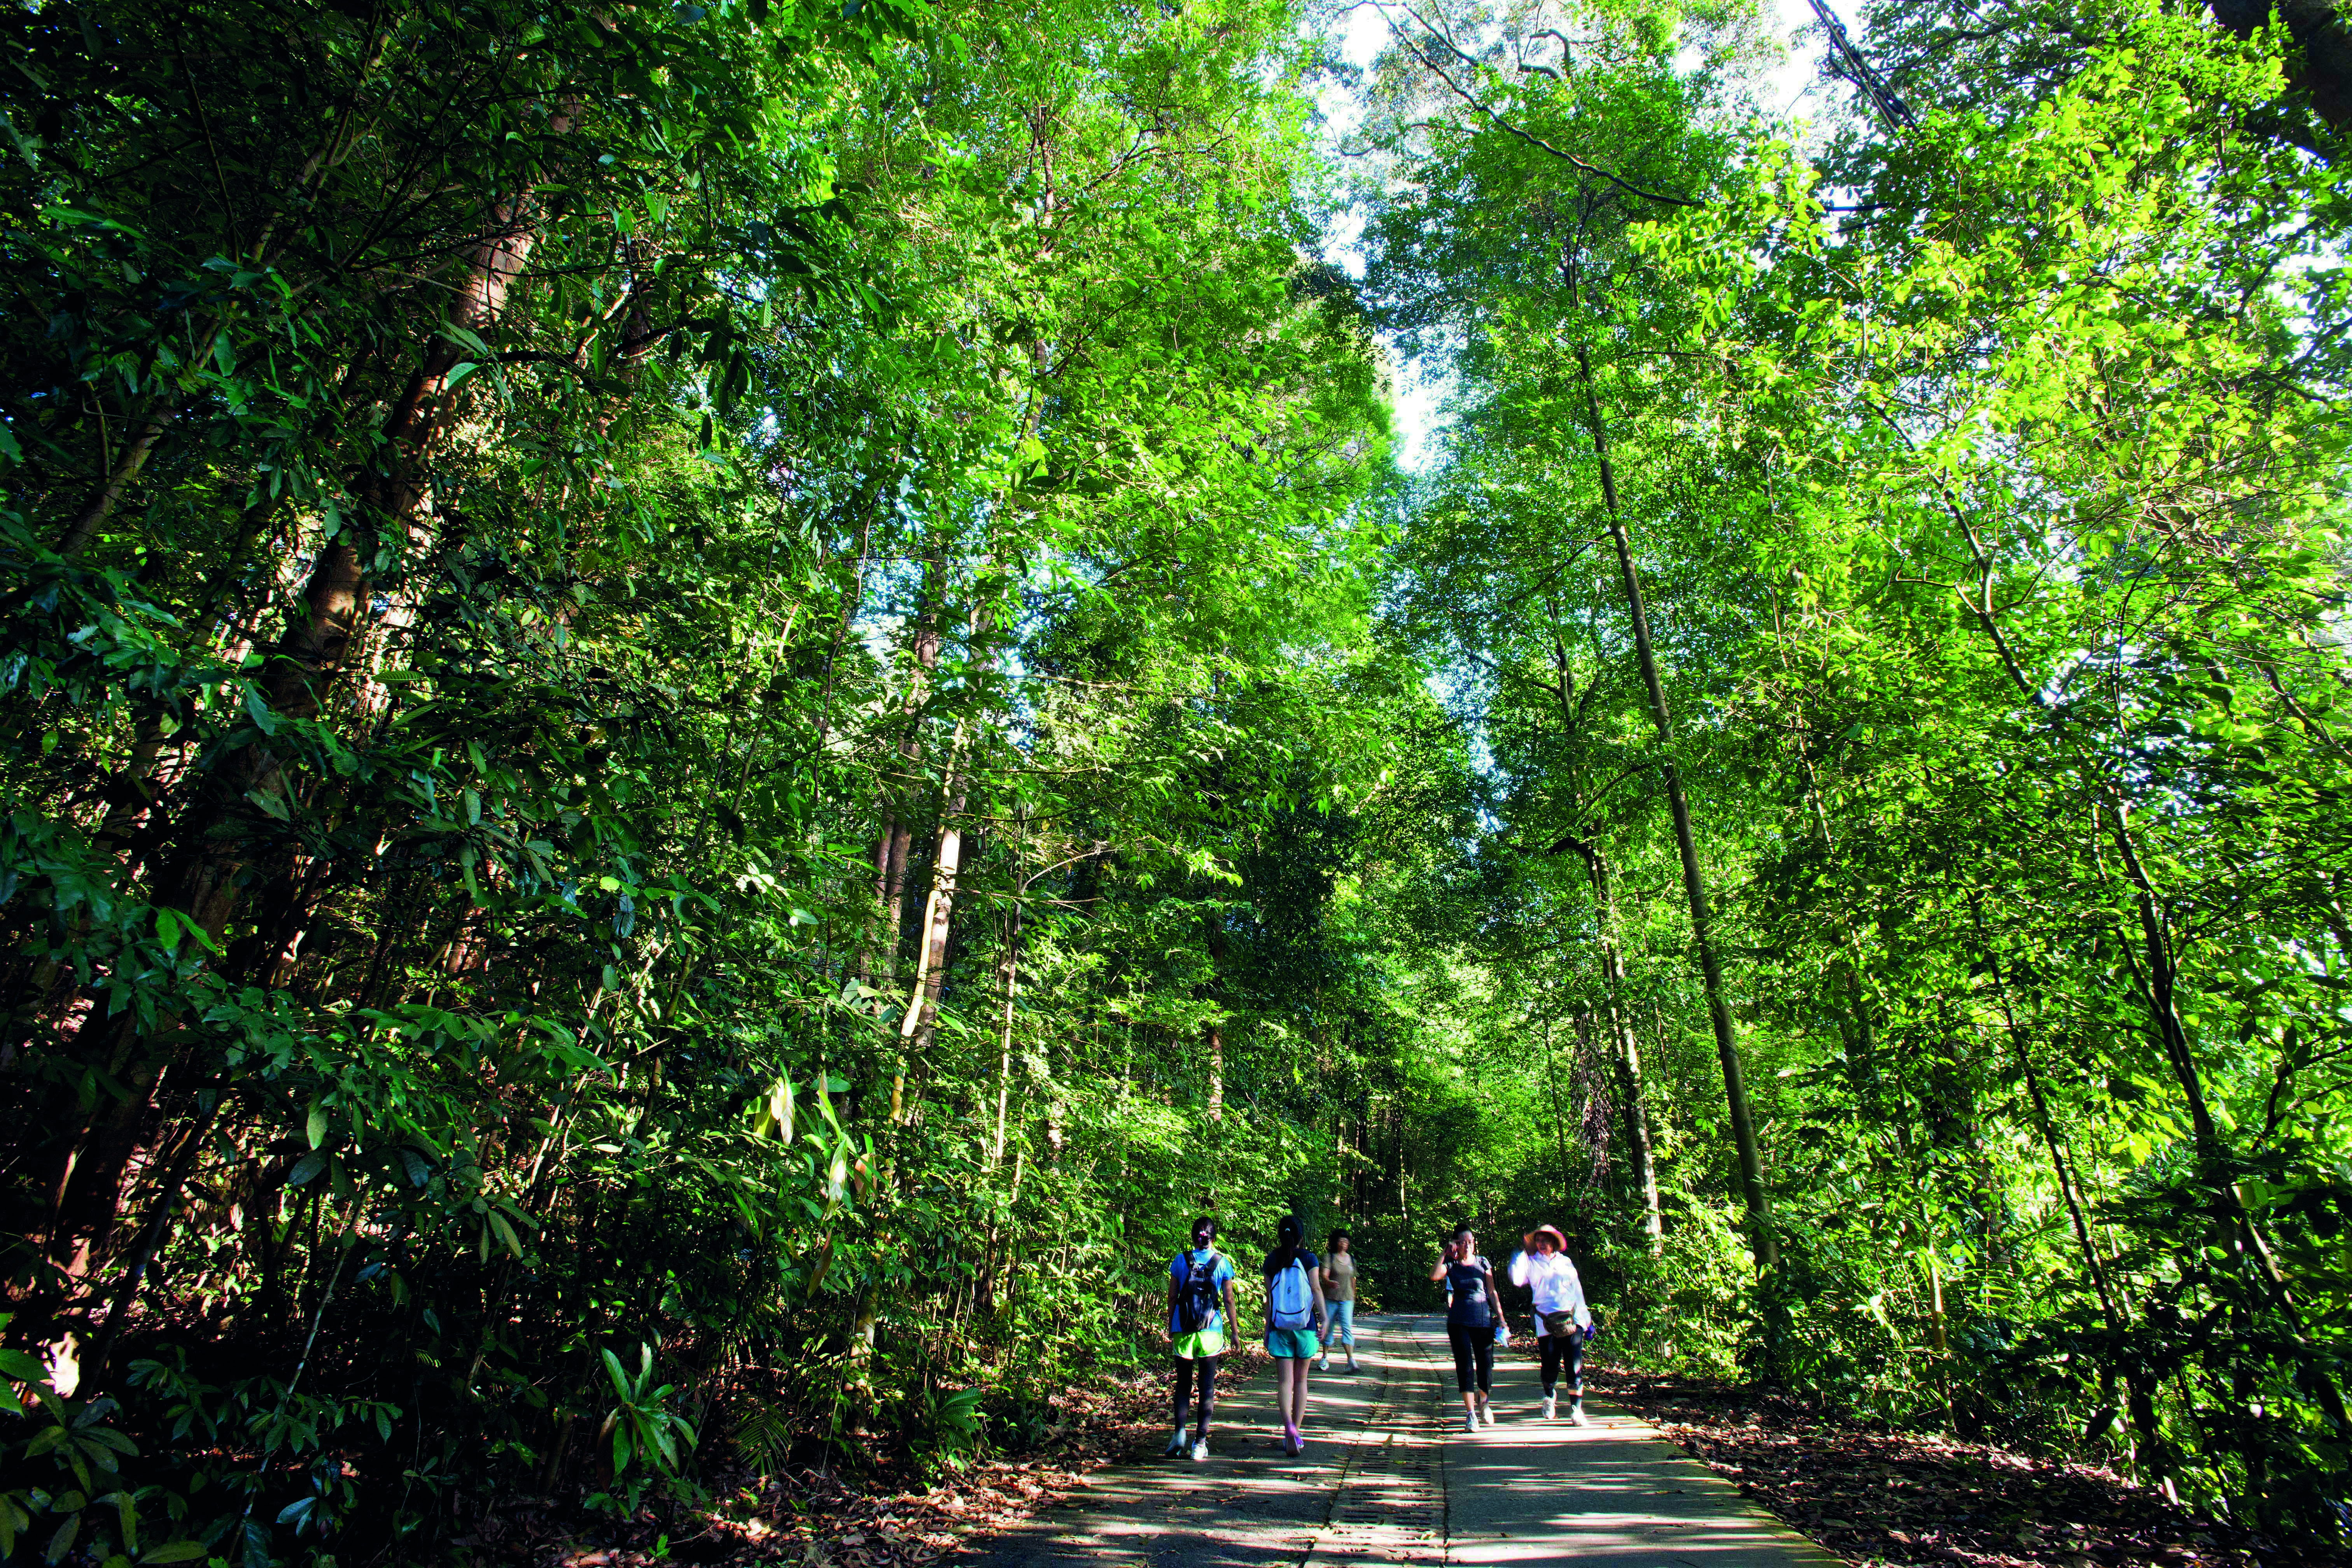 Nature Appreciation Walk at Bukit Timah Nature Reserve - - - What's On -  Activities - National Parks Board (NParks)